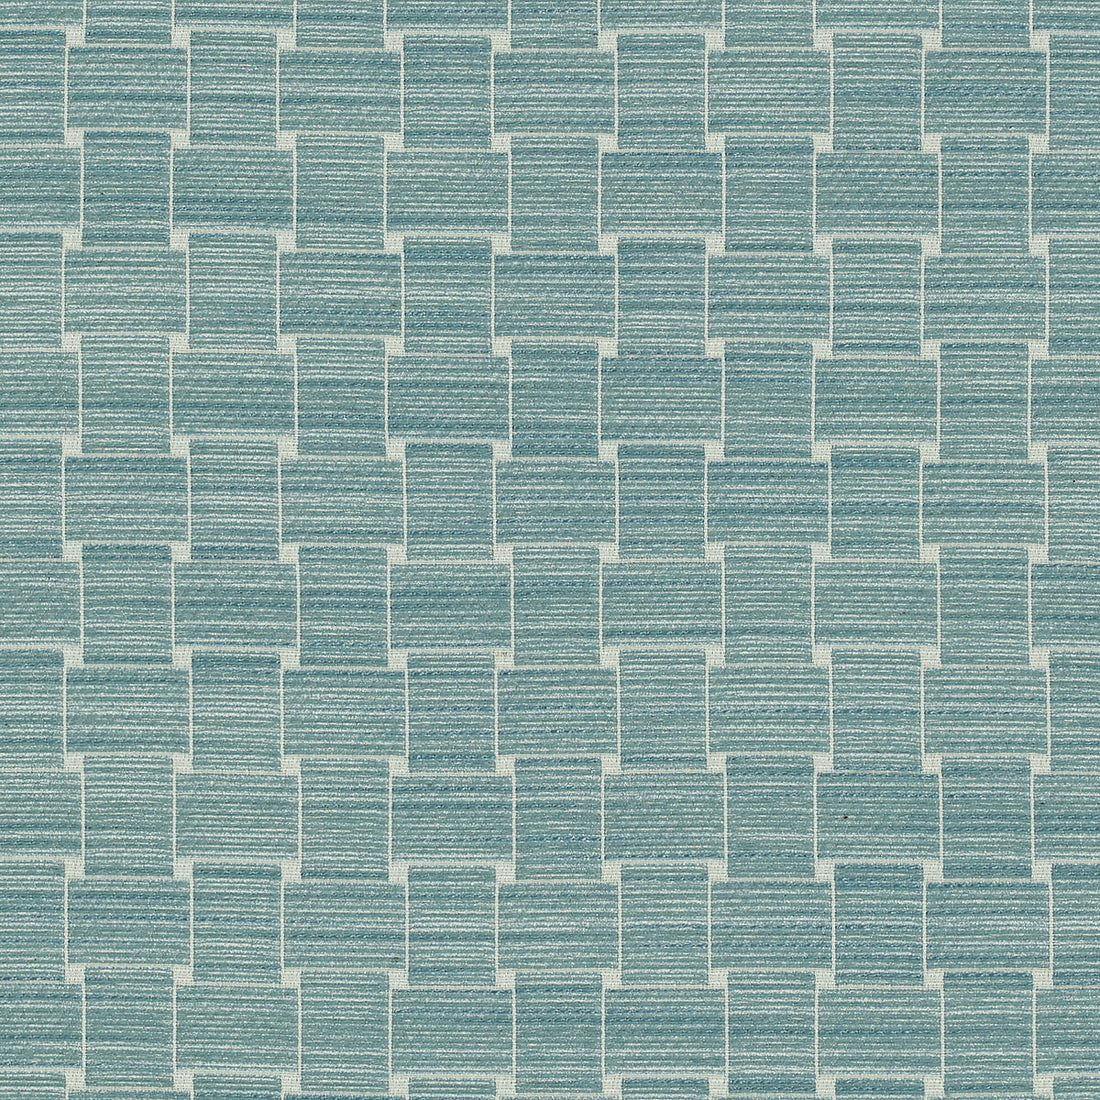 Beaumois Woven fabric in mist color - pattern 8020108.113.0 - by Brunschwig &amp; Fils in the Granville Weaves collection